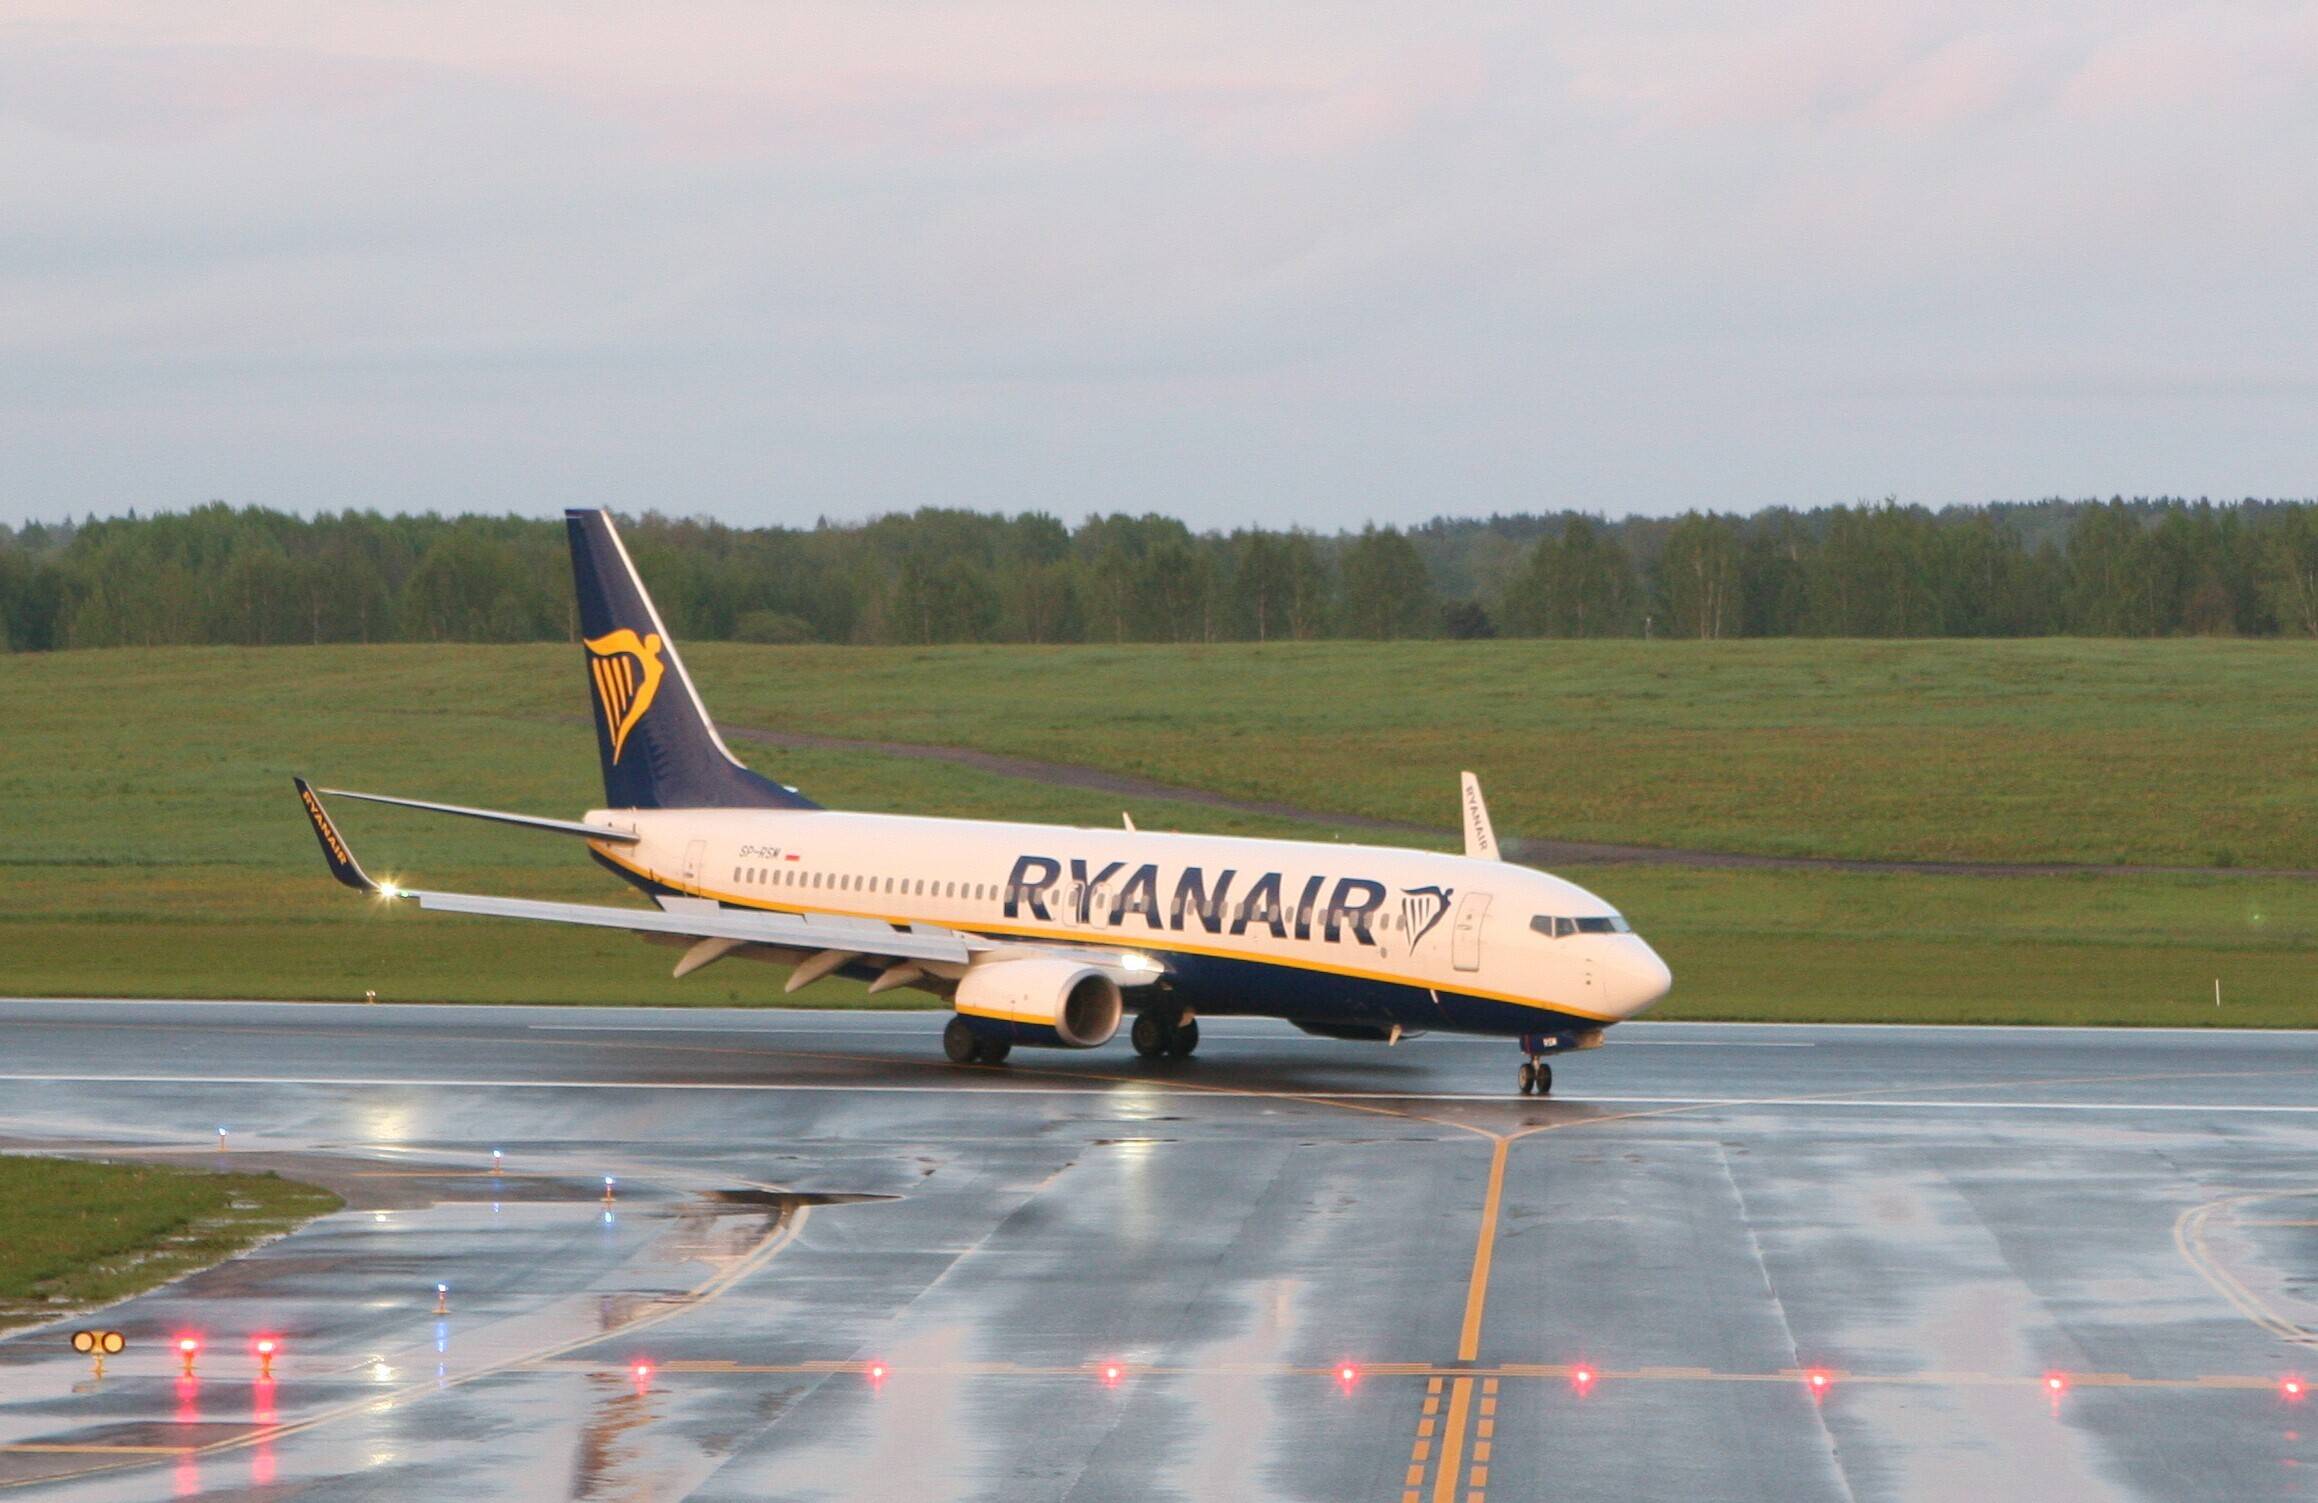 PHOTO: The Ryanair plane carrying opposition figure Raman Pratasevich which was diverted to Minsk after a bomb threat, lands at the International Airport outside Vilnius, Lithuania, May 23, 2021.